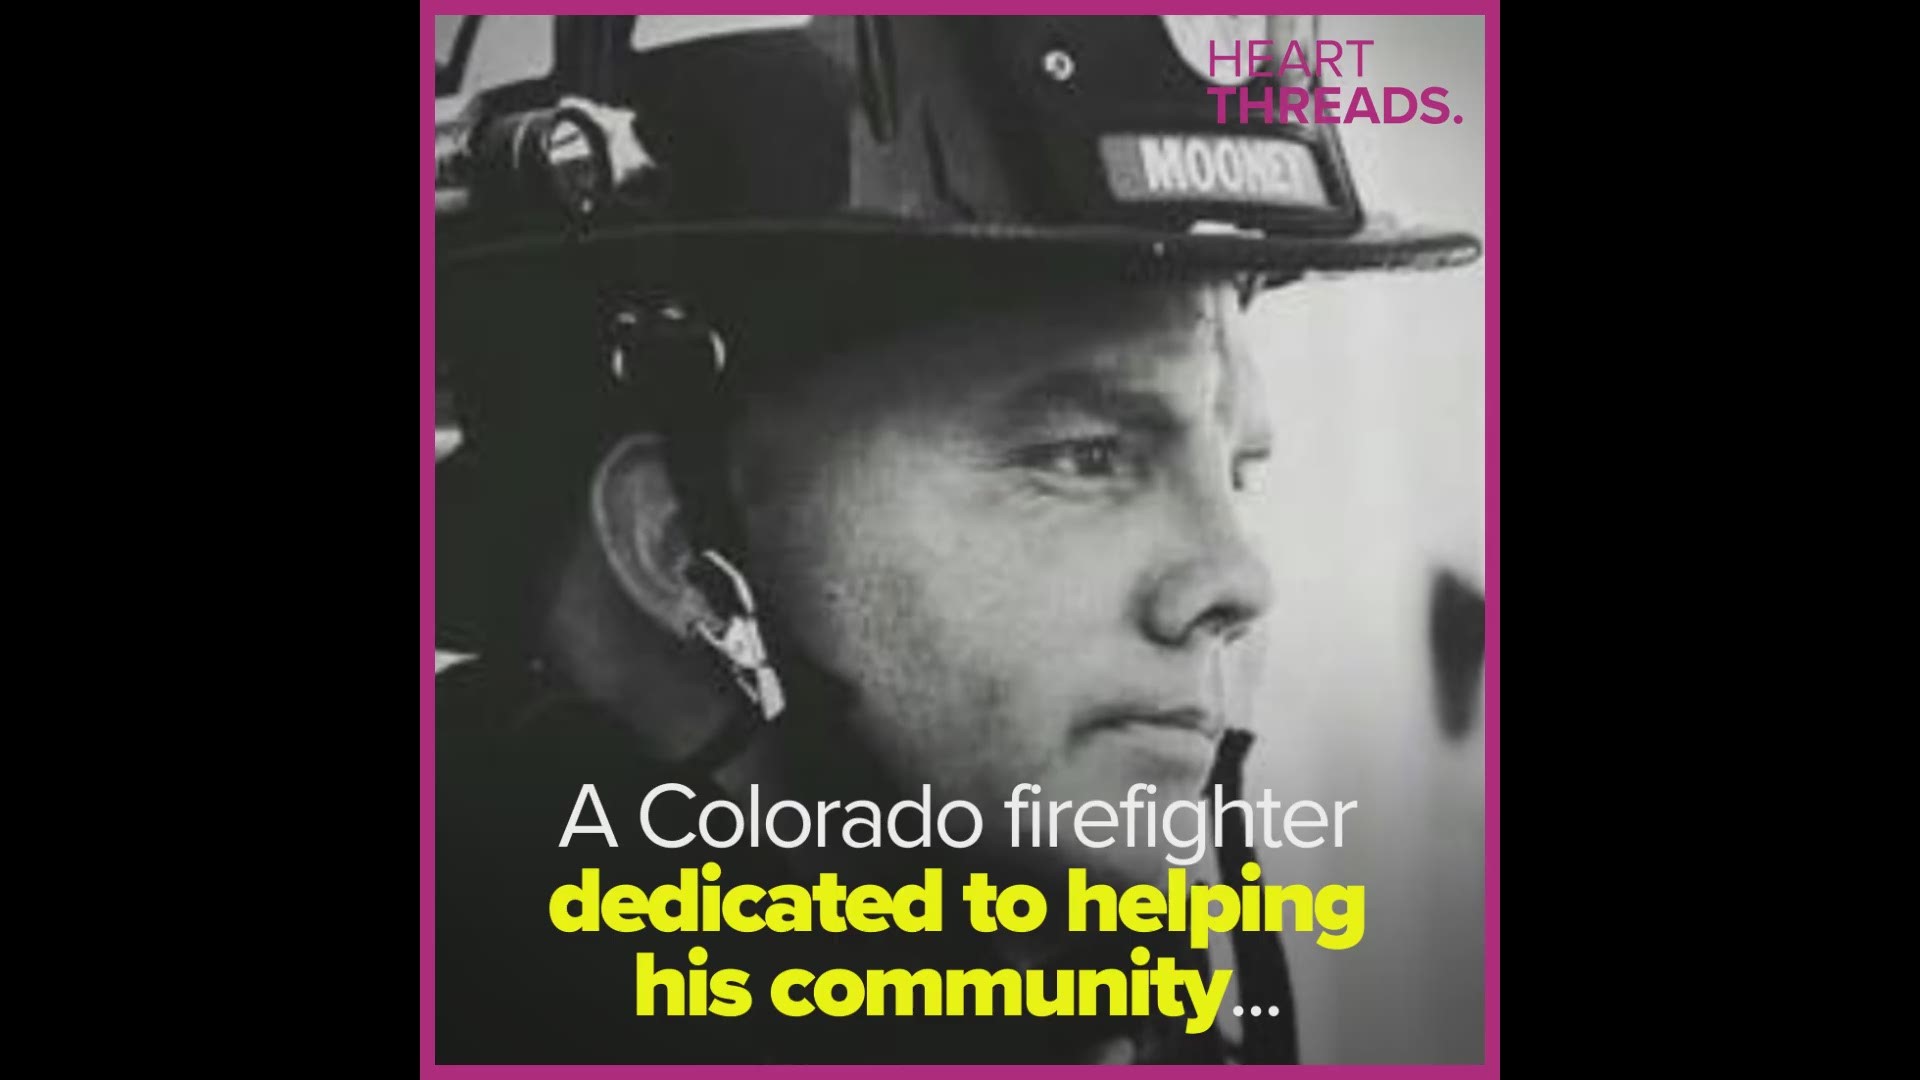 Cody Mooney was committed to helping people as a firefighter. Even after a brain tumor cut his life tragically short, he continued to save others through organ donation.